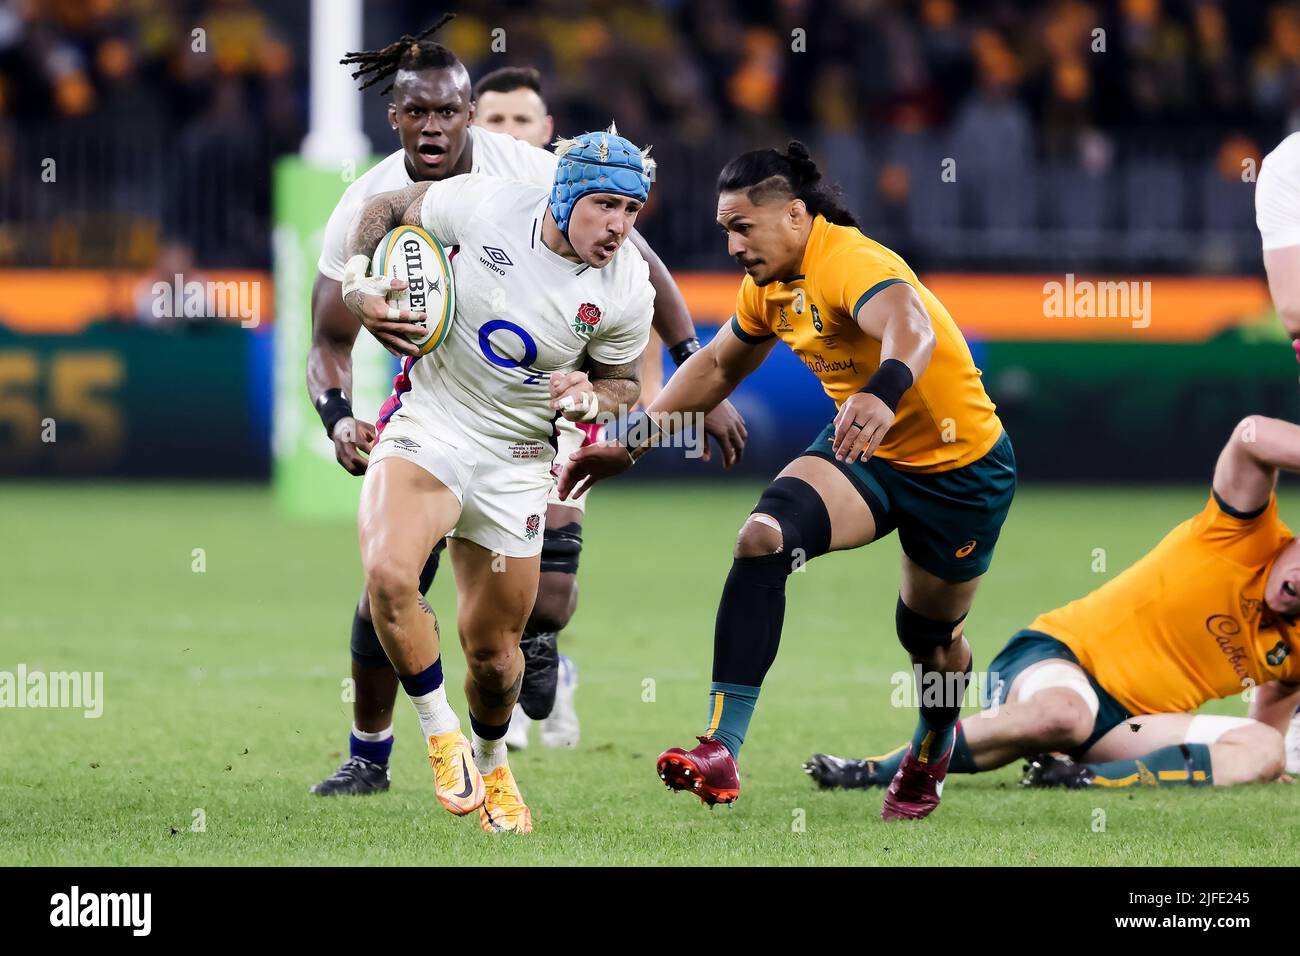 Perth, Australia, 2 July, 2022. Jack Nowell of England runs with the ball during the rugby international test match between the Australia Wallabies and England at Optus Stadium on July 02, 2022 in Perth, Australia. Credit: Graham Conaty/Speed Media/Alamy Live News Stock Photo